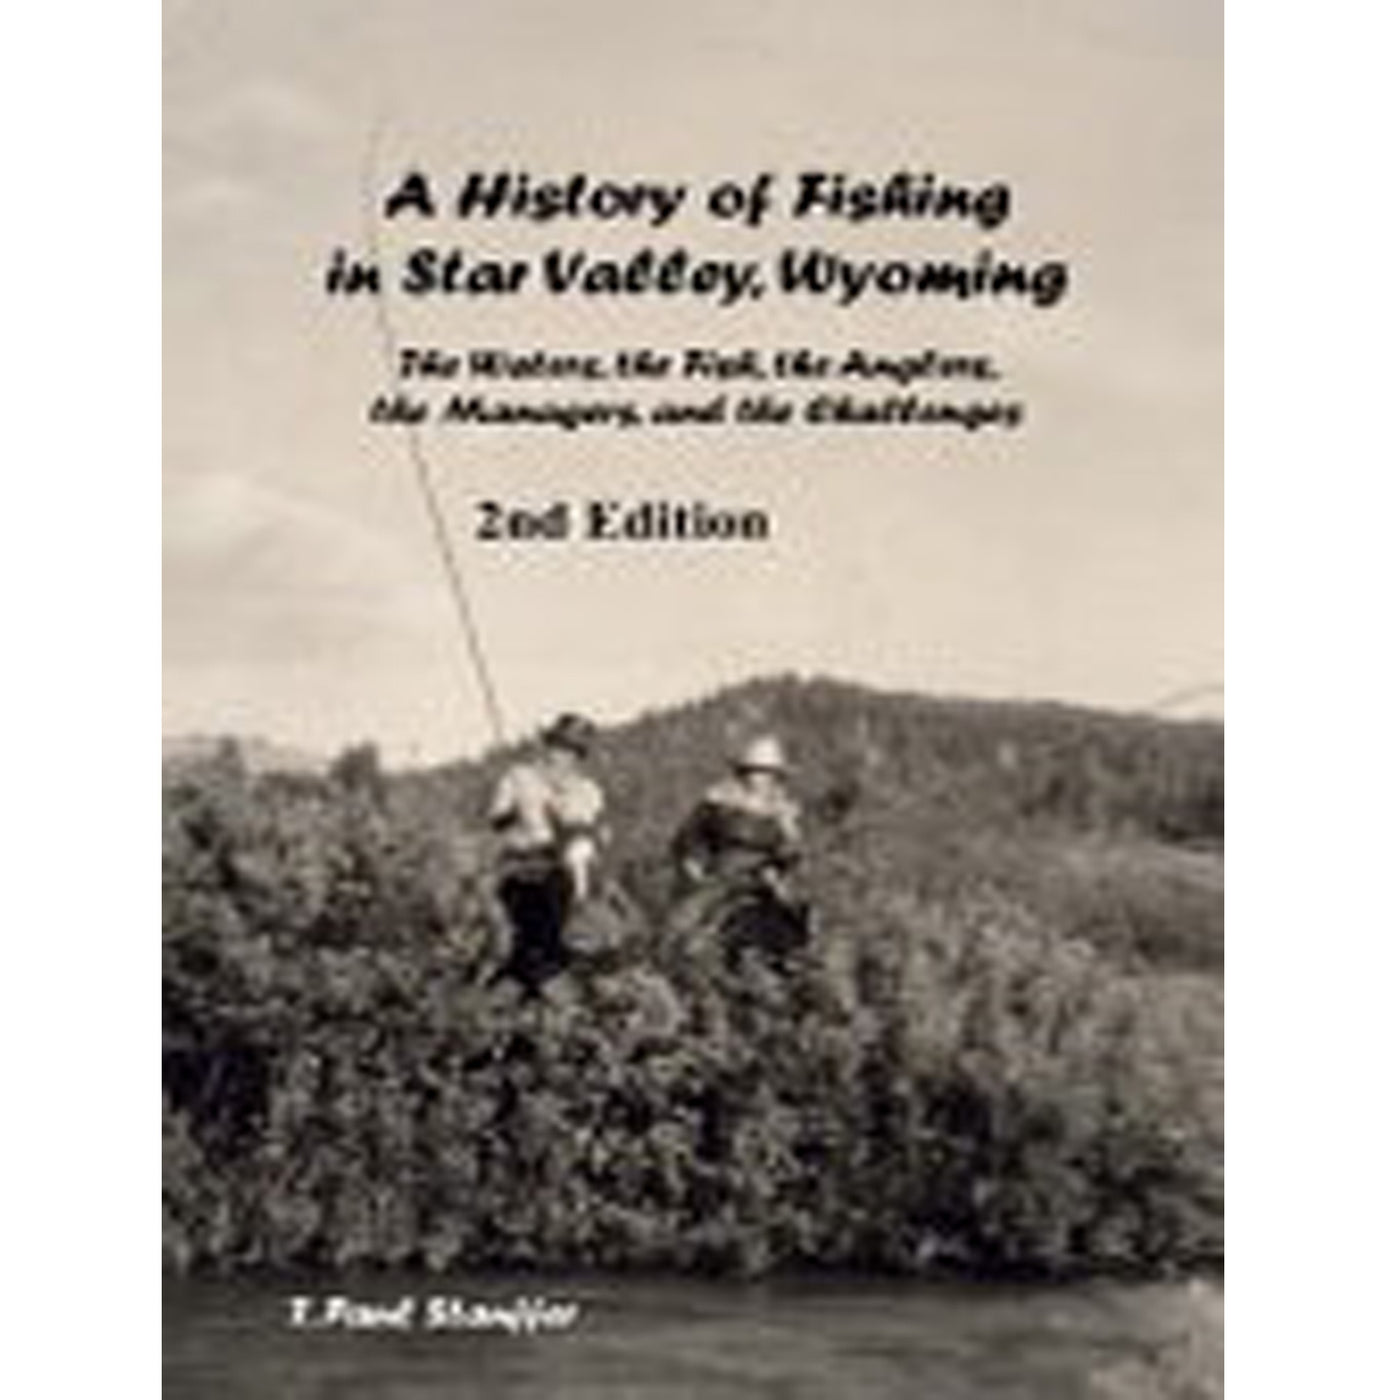 Book cover of 'A History of Fishing in Star Valley 2nd Edition' by T. Paul Stauffer featuring a man and a woman on horseback by the Salt River, surrounded by thick willows. The woman holds a fly rod and both are looking towards the river with mountains in the background.